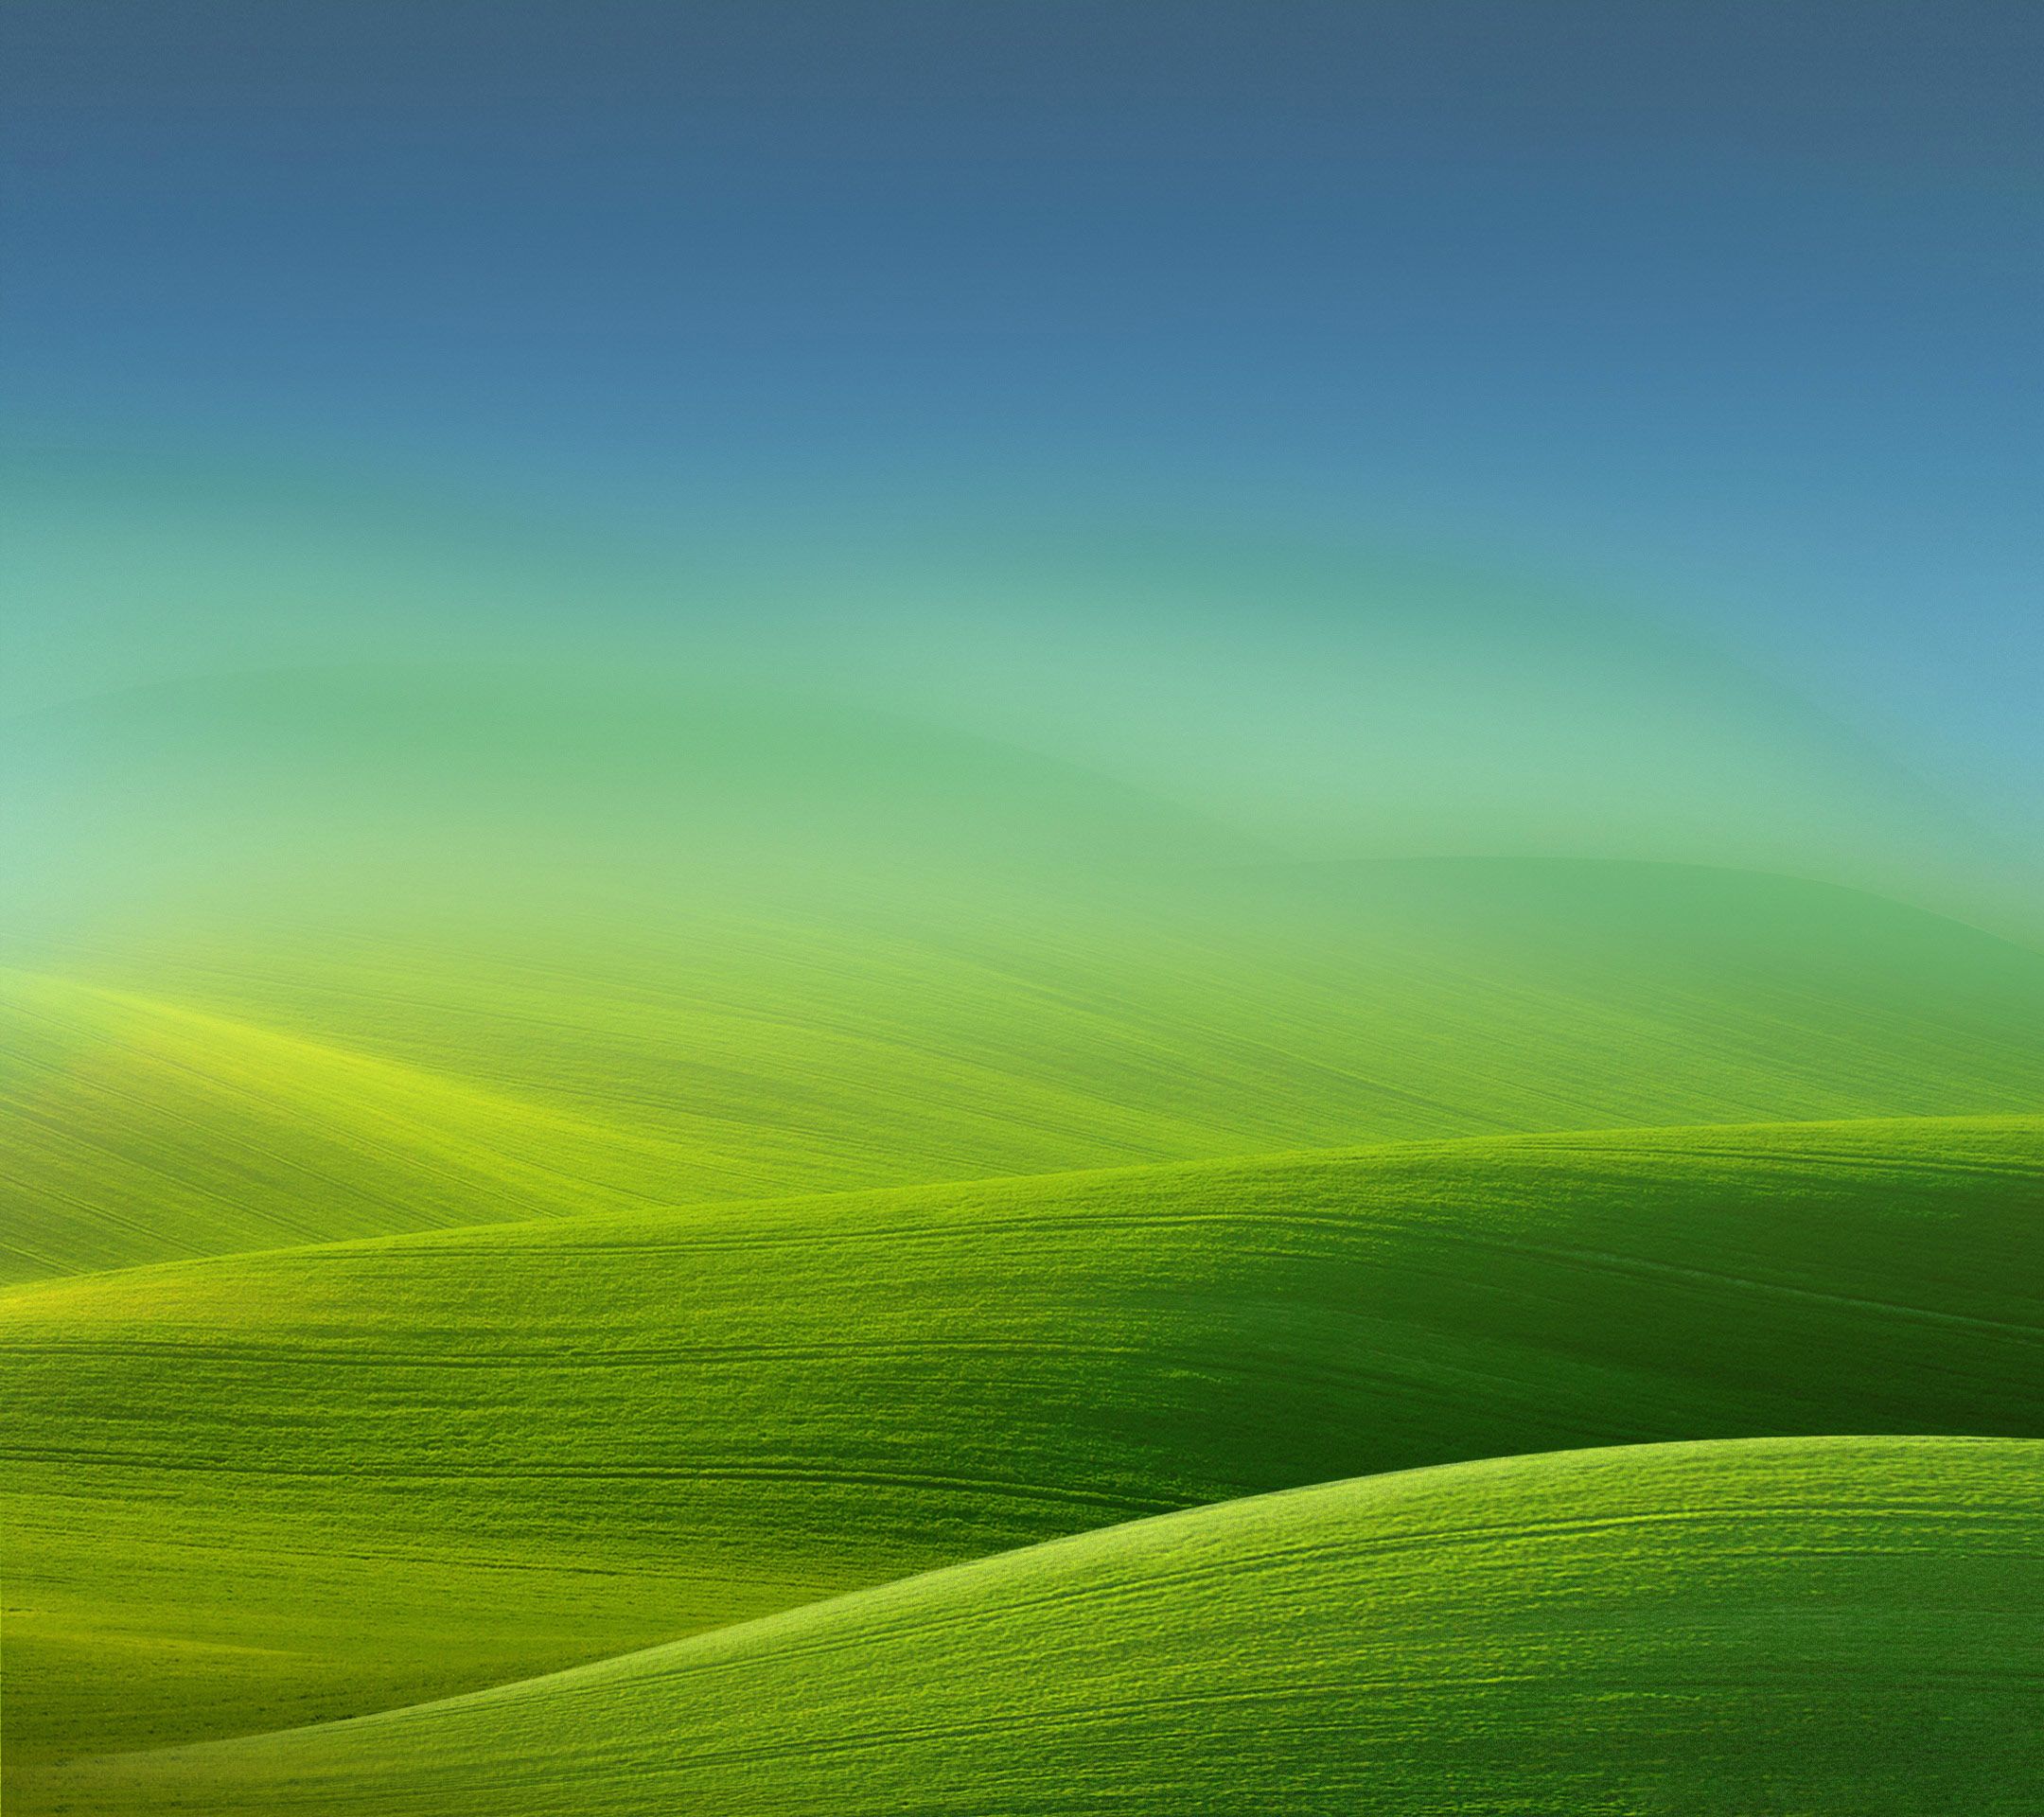 WALLPAPERS All MIUI V6 Wallpapers Locksc Android Development